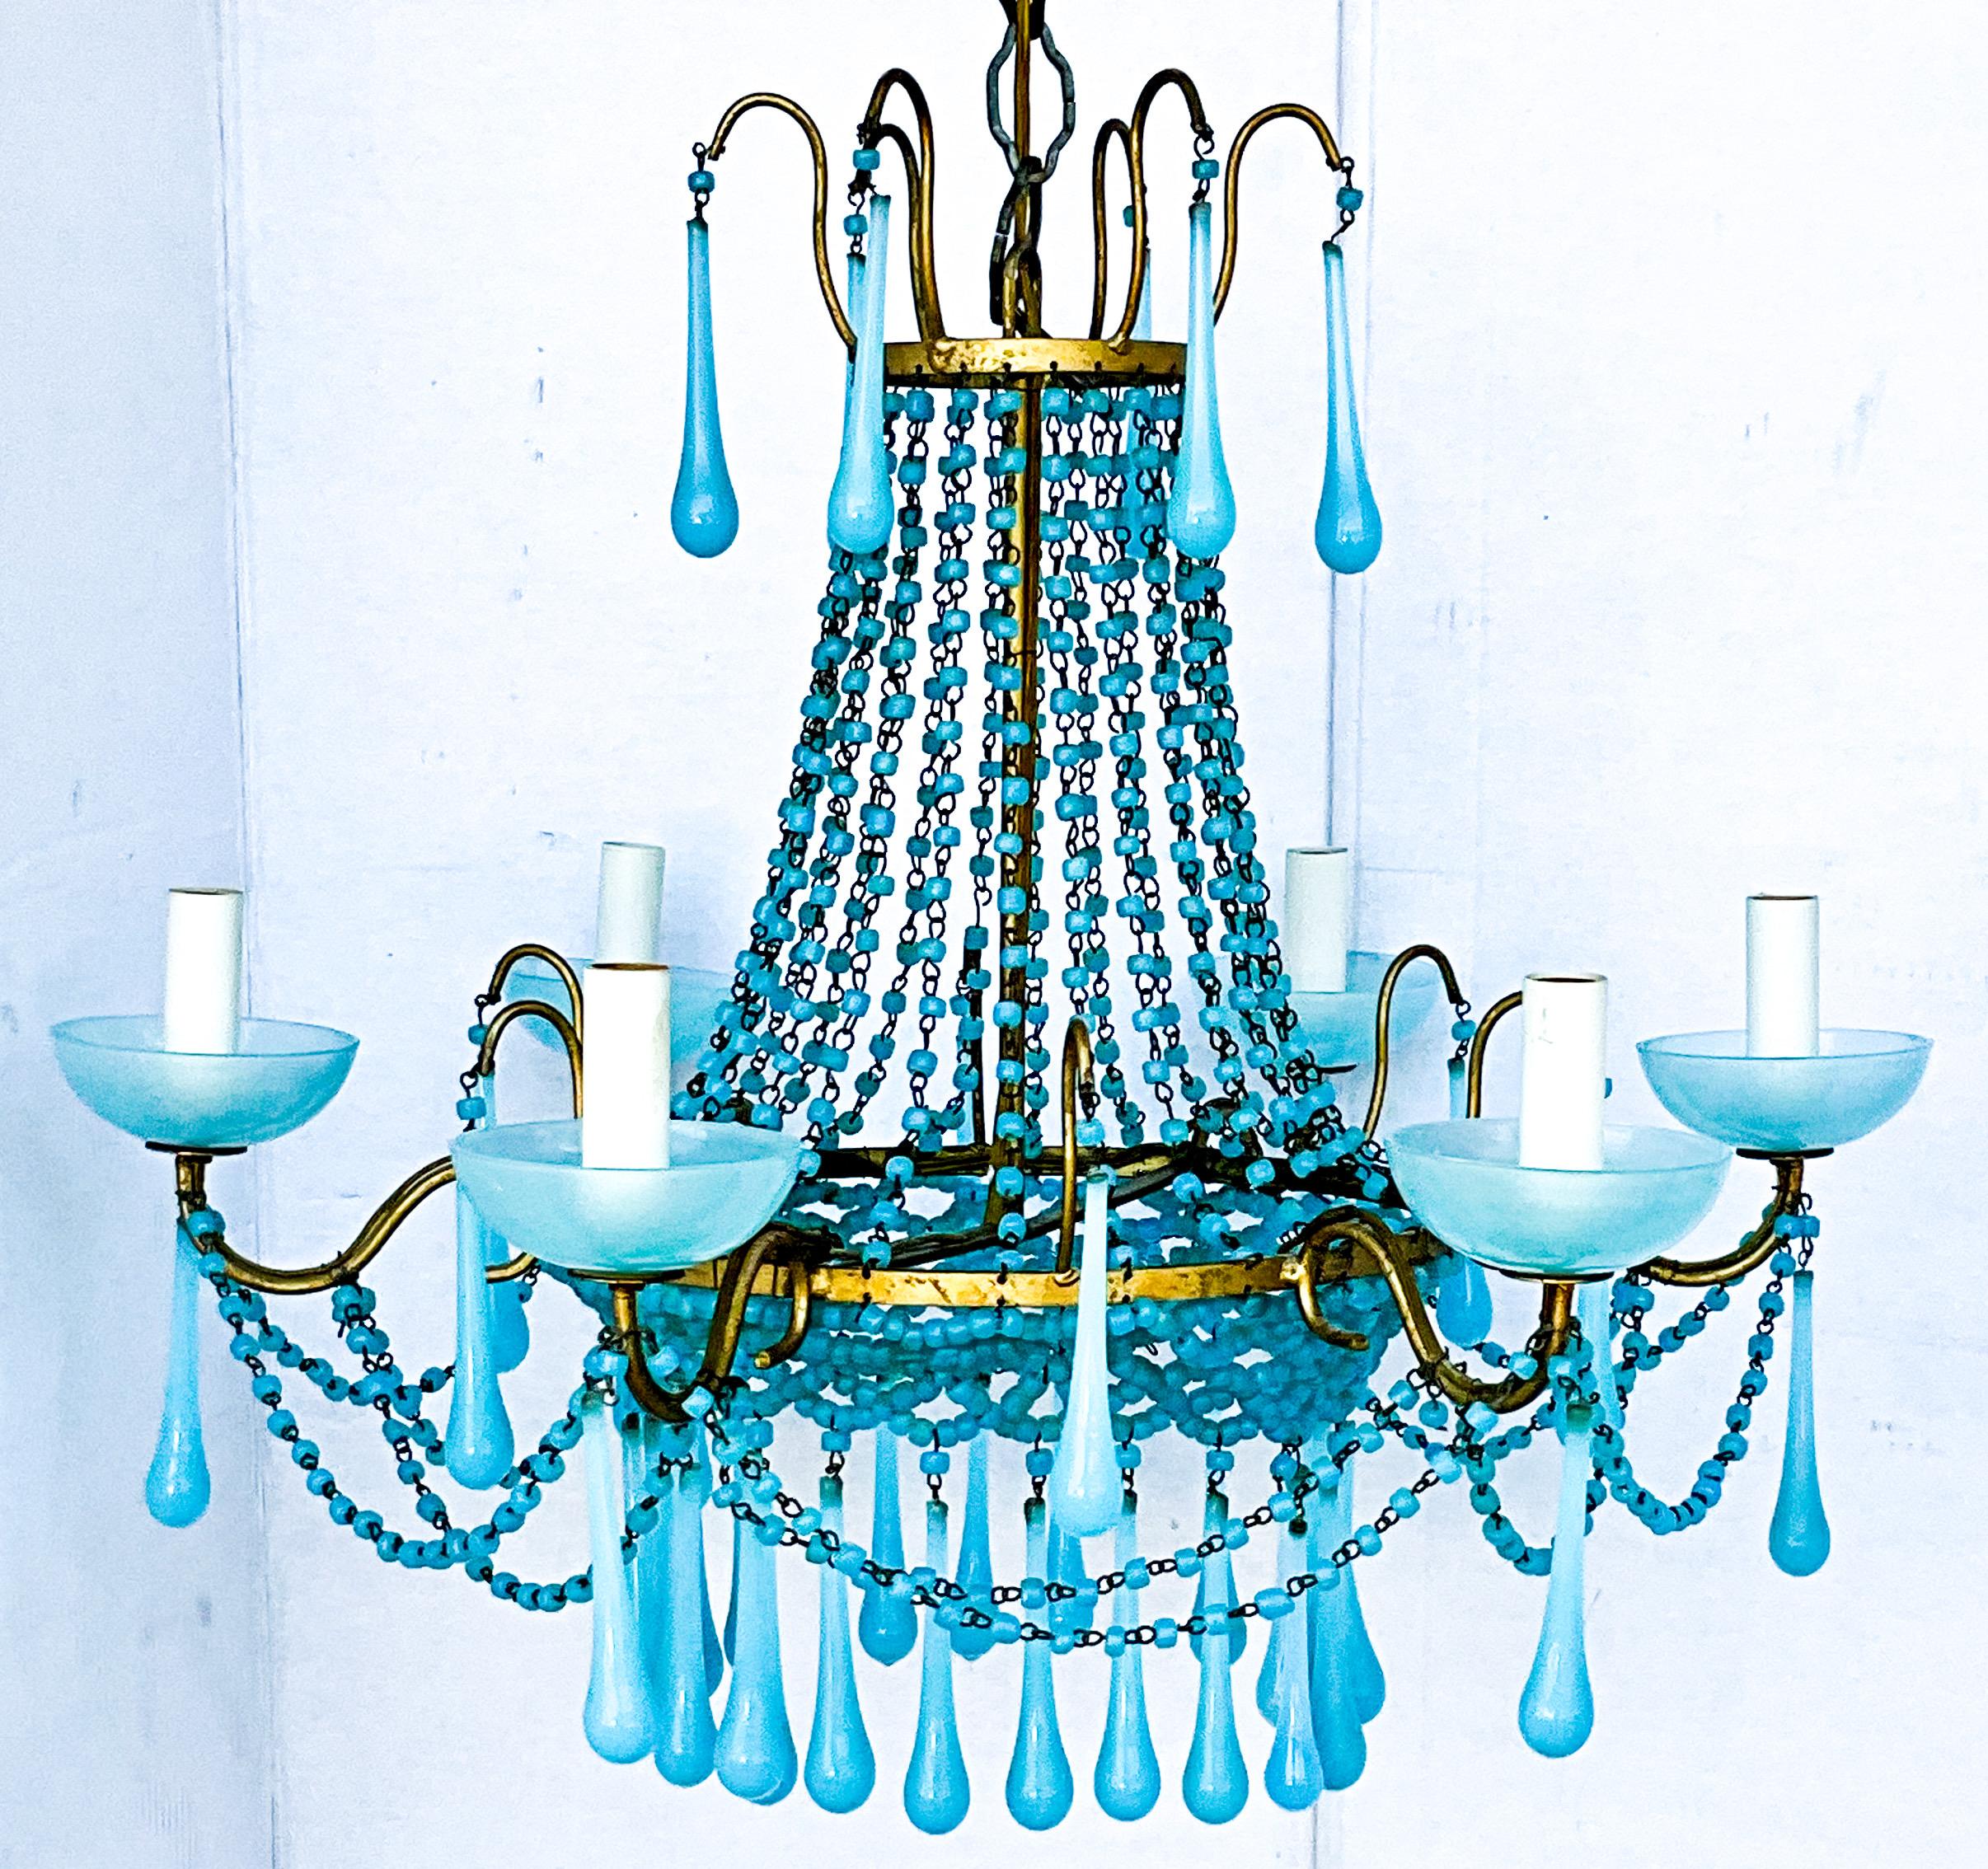 Late 20th Century Italian Turquoise Crystal & Gilt Metal Chandelier - 6 Arm  For Sale 2